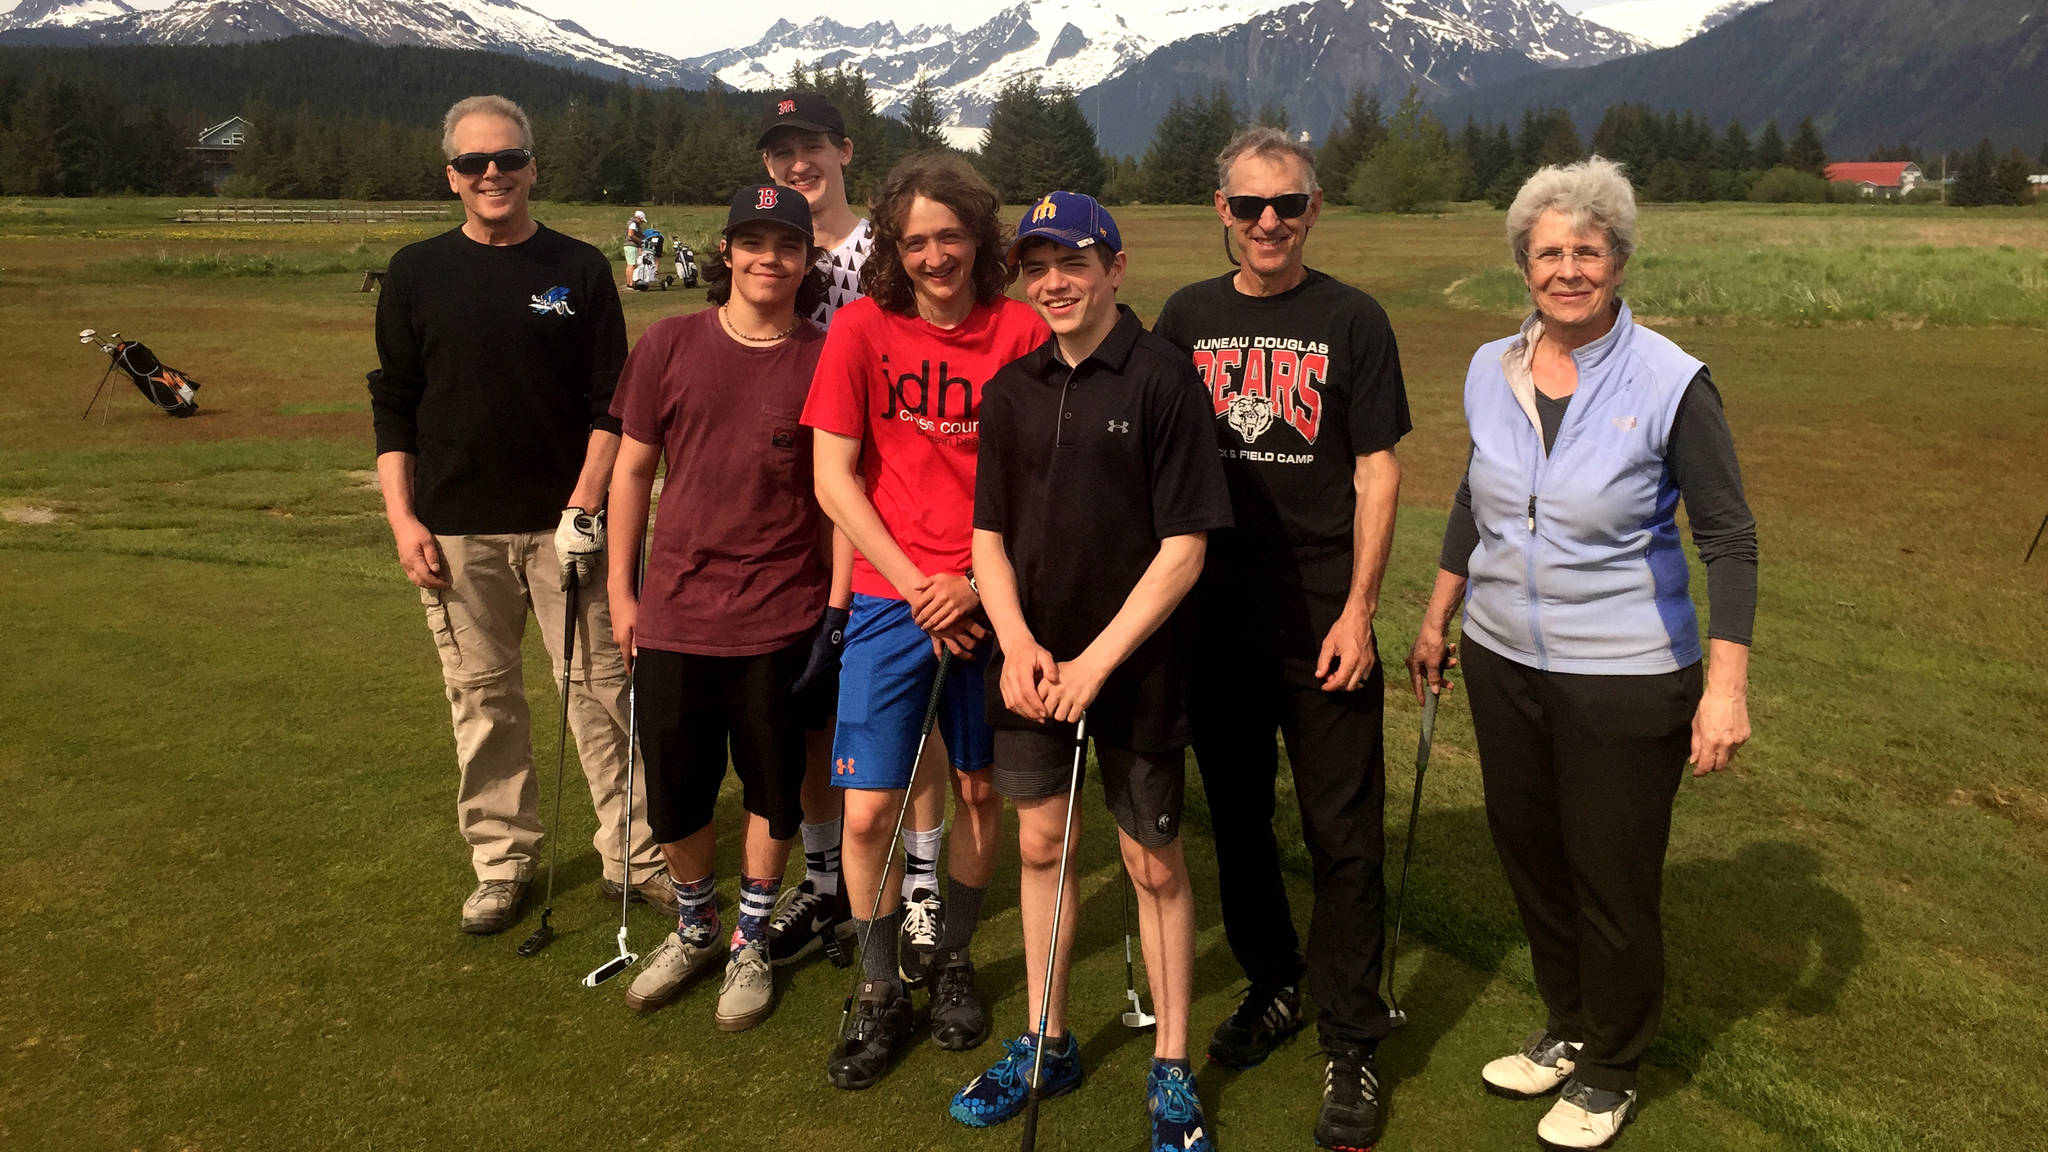 The Juneau Junior Golf Club poses on the first green of the Mendenhall Golf Course. The club is recruiting youth ages 12-18 to its summer program that introduces the skills, rules and etiquette of golf to beginners. Left to right: Tom Daugherty, Henry Davis, Cody Mitchell, Arna Ellefson-Carnes, Connor Norman, Guy Thibodeau and Diane Mayer. (Nolin Ainsworth | Juneau Empire)